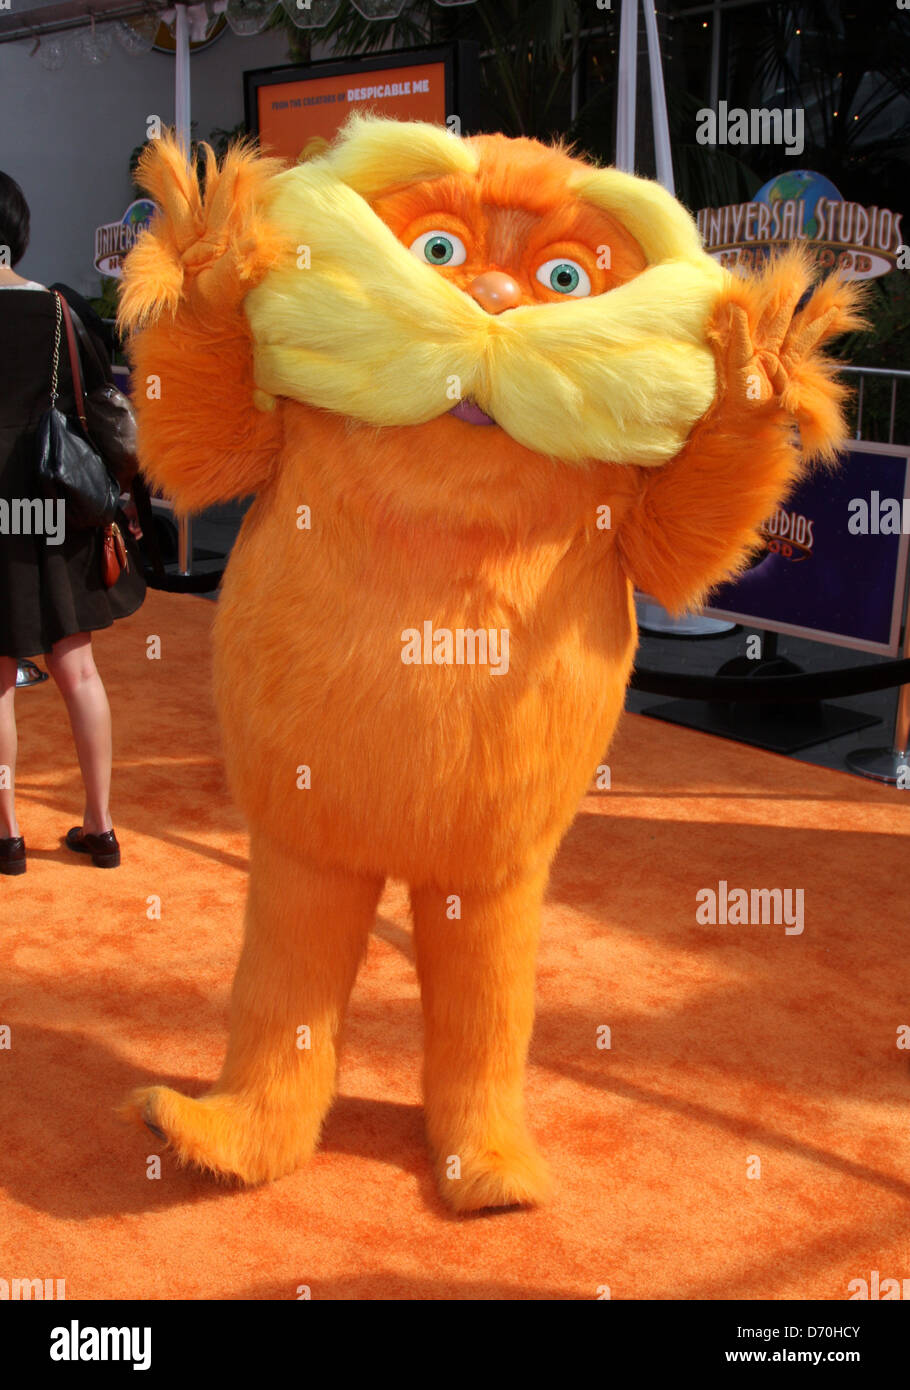 Lorax The premiere of 'The Lorax' held at the Universal Citywalk - Arrivals Los Angeles, California - 19.02.12 Stock Photo